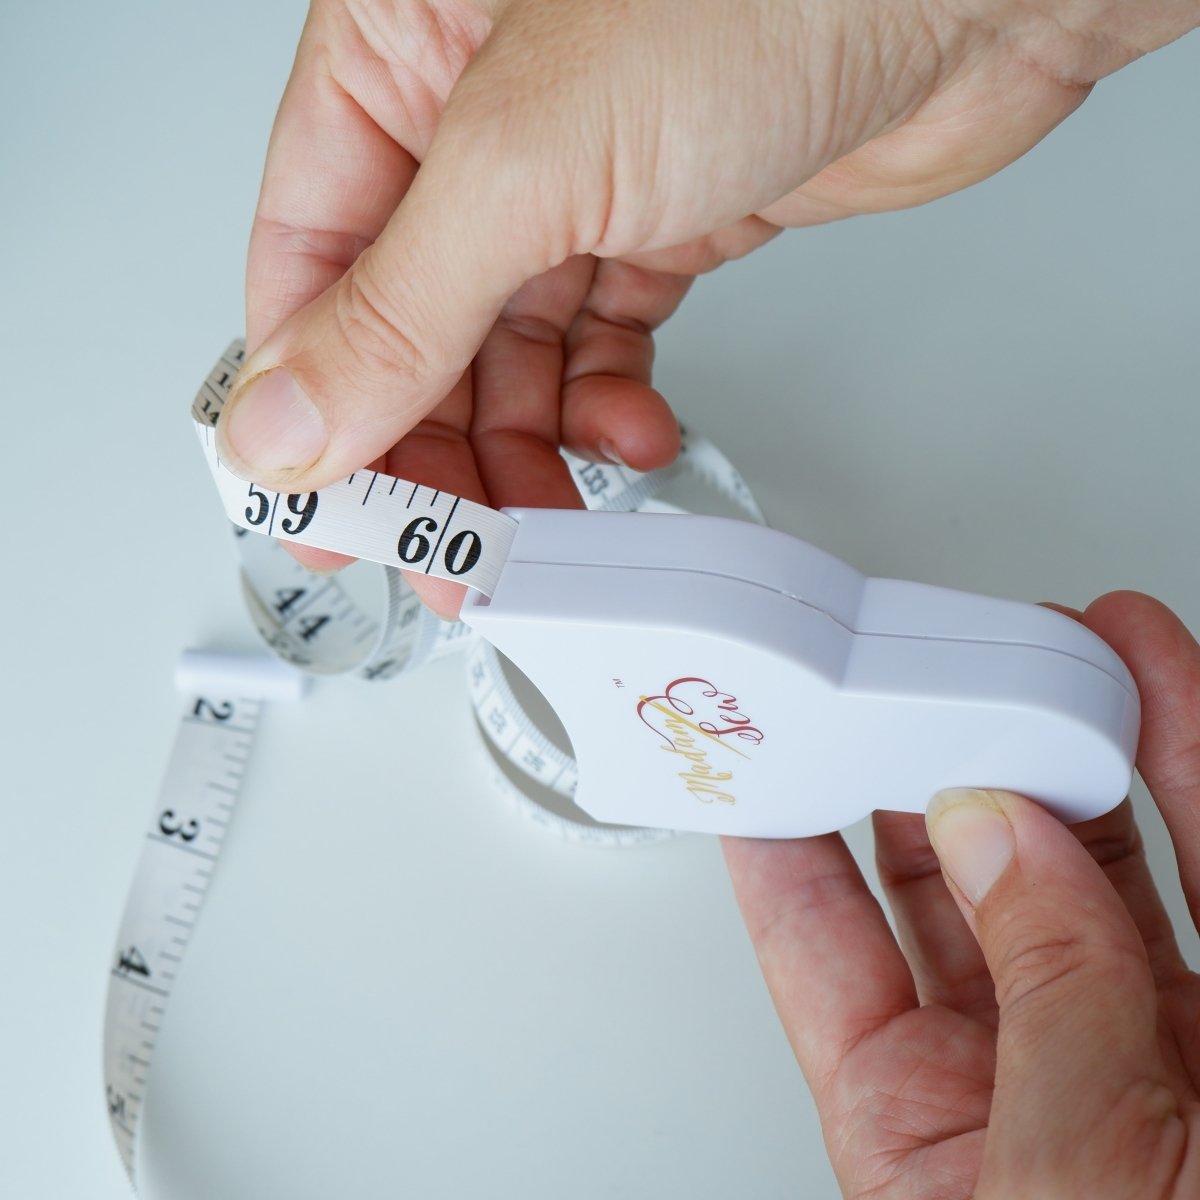 Body measurement tape for sewing